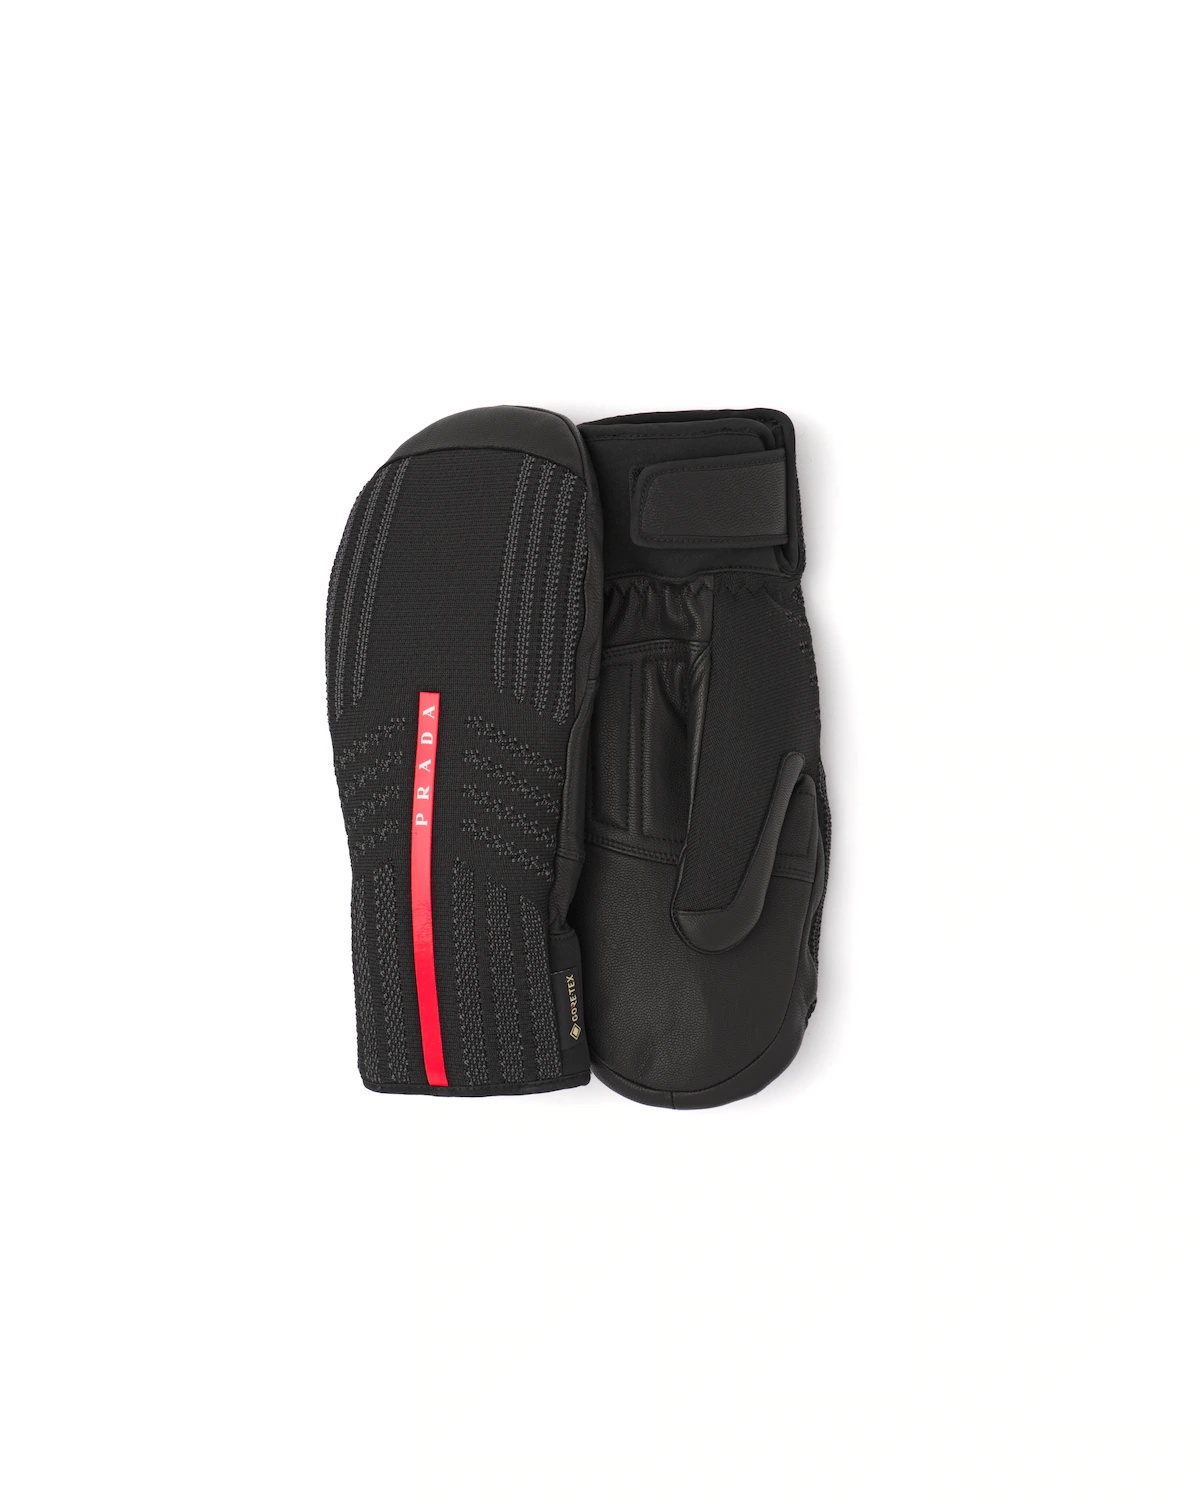 GORE-TEX, leather and knit ski mittens - 1